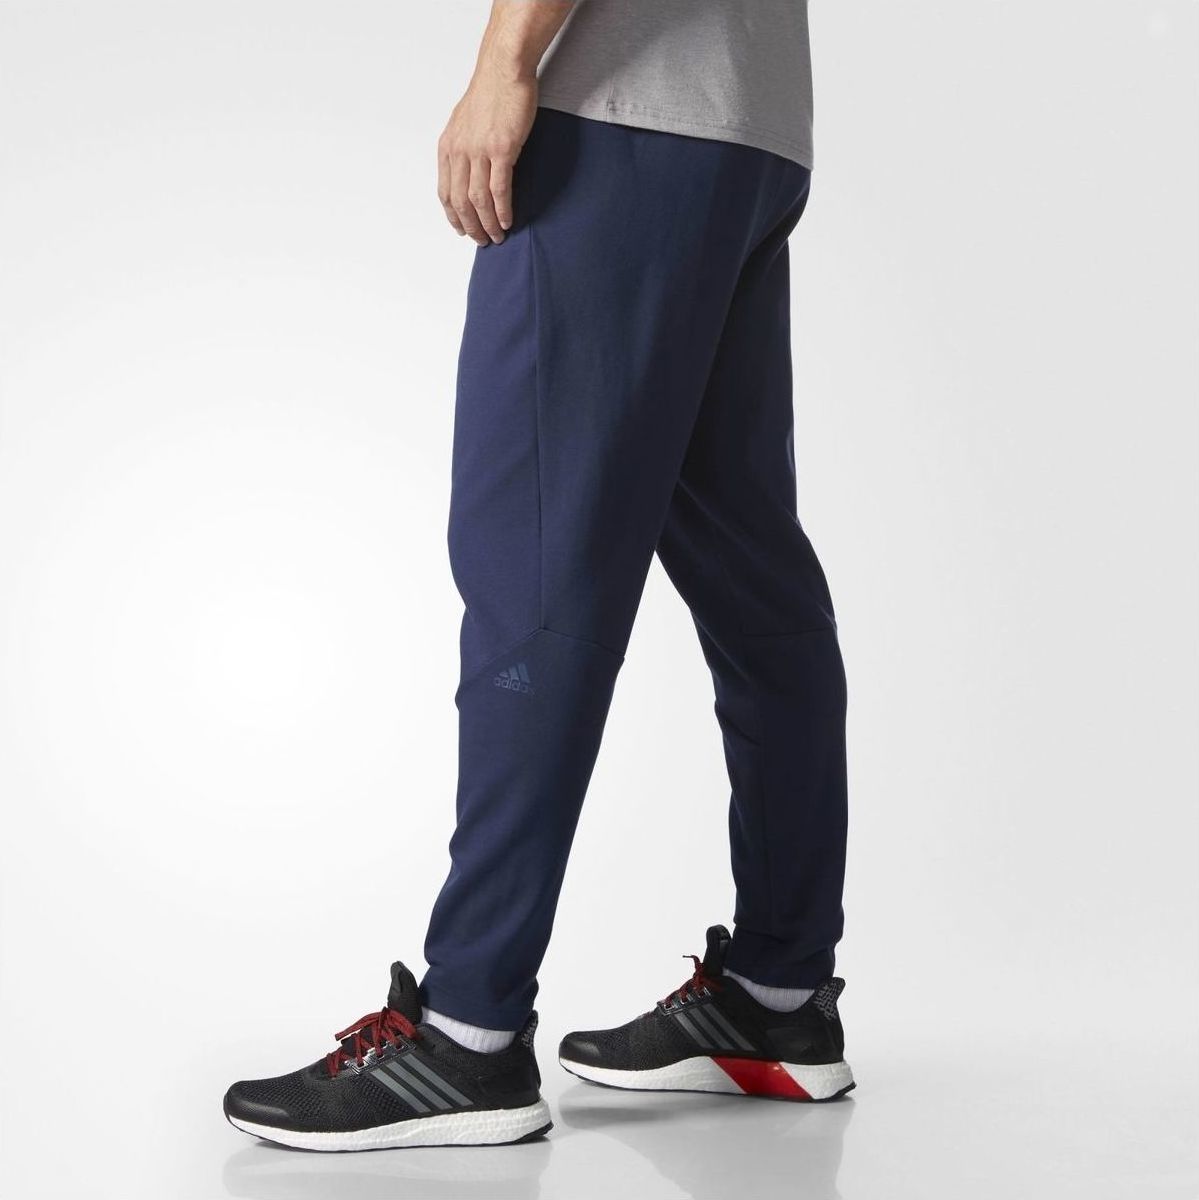 adidas Zne Aerordy Pnt Blue Walking Track Pant Buy adidas Zne Aerordy Pnt  Blue Walking Track Pant Online at Best Price in India  NykaaMan